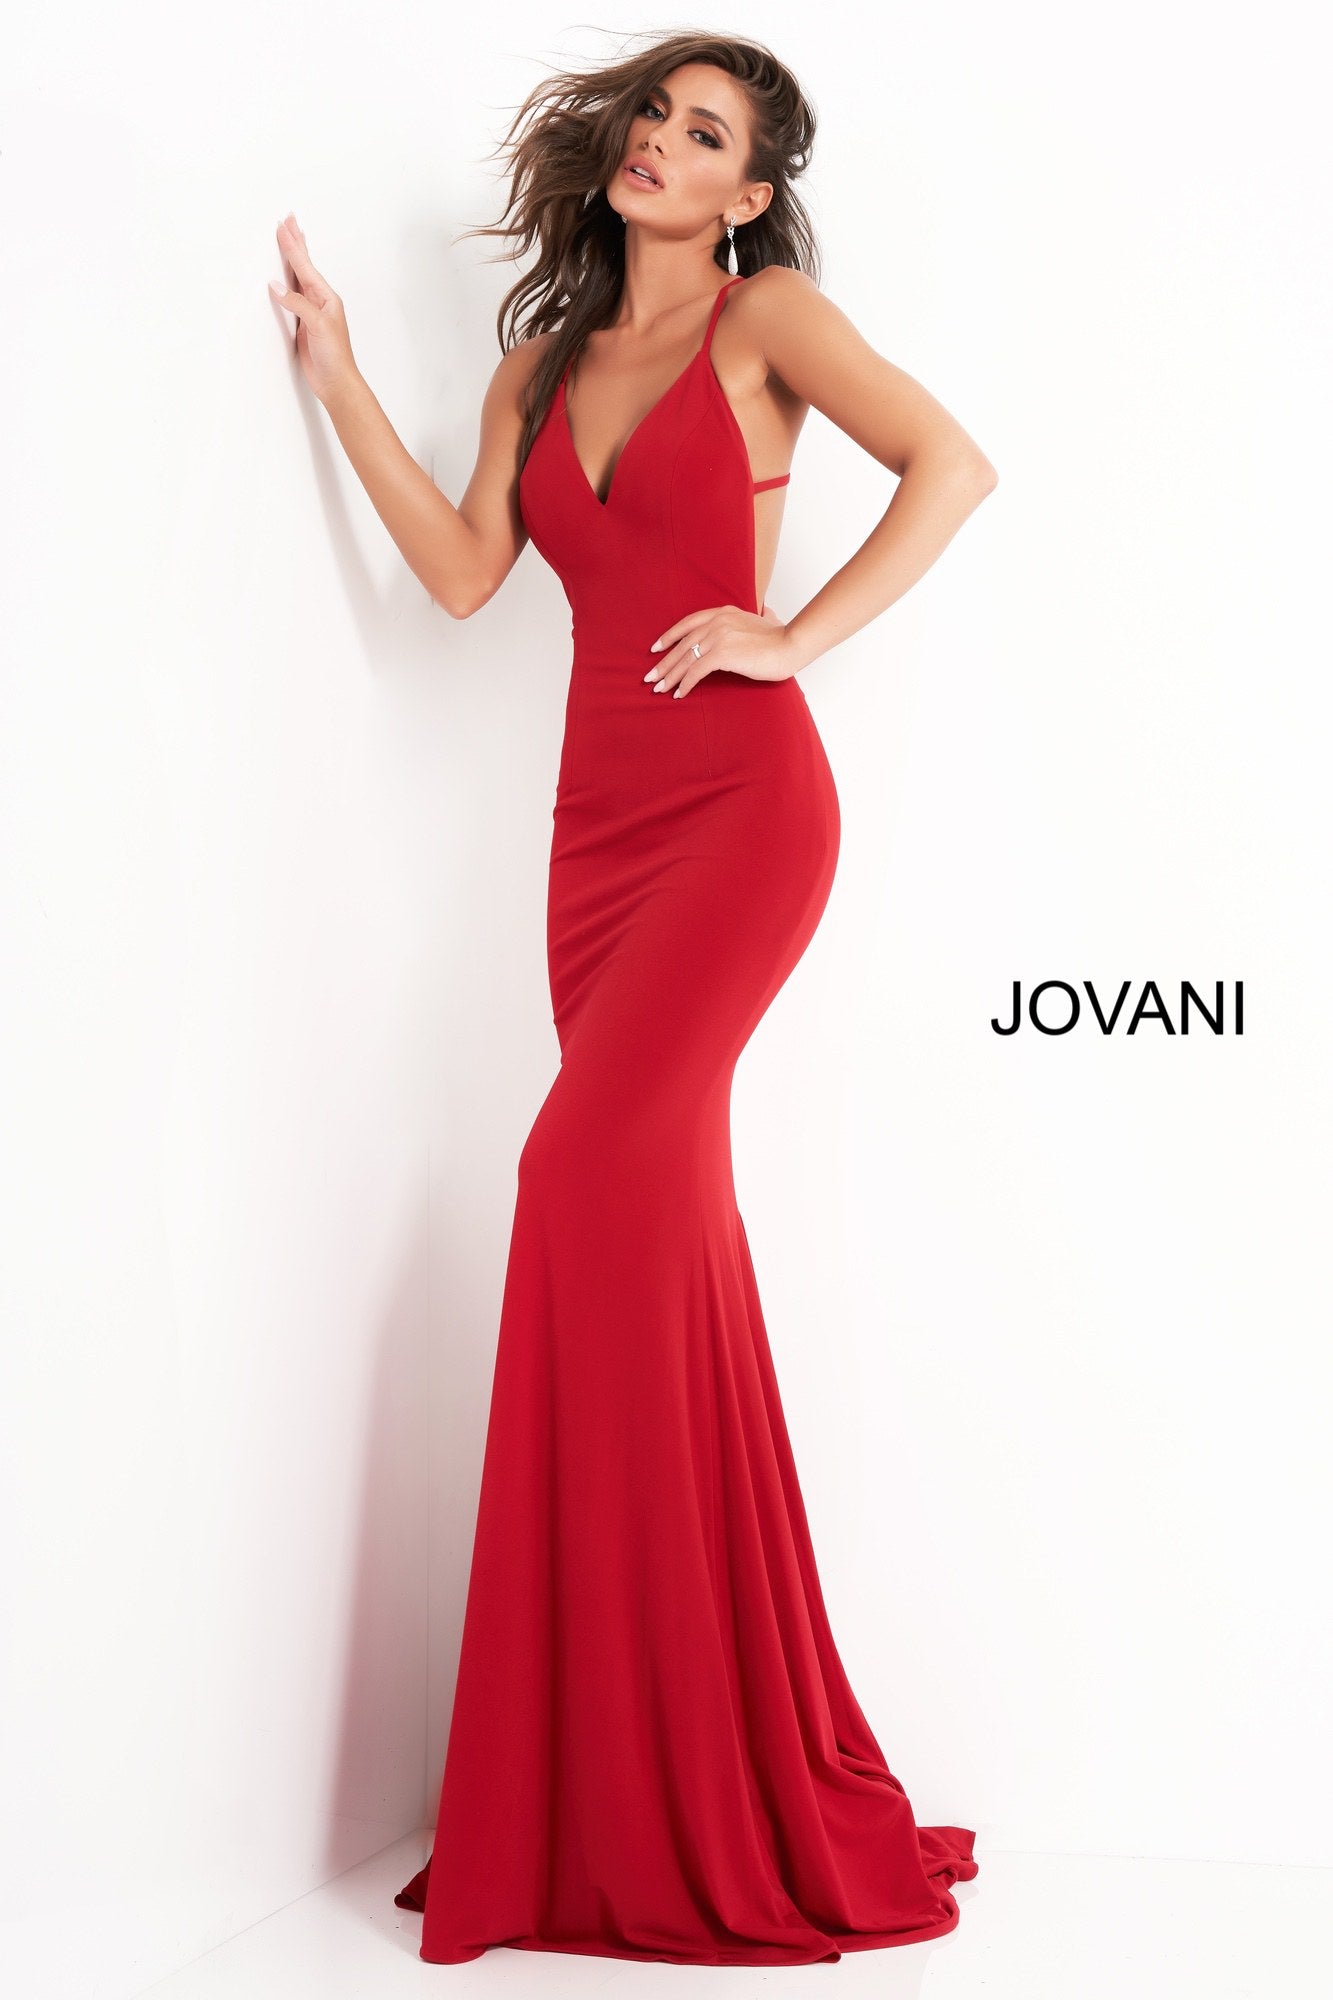 Jovani 00512 plunging v neckline fitted mermaid prom dress evening gown pageant dress has an open back with multiple straps that cross to create a dramatic effect.  Ruching at the lower back to give a little extra lushness and a small sweeping train.   Available colors:  Black, Blush, Burgundy, Red, Navy, Sage  Available sizes:  00, 0, 2, 4, 6, 8, 10, 12, 14, 16, 18, 20, 22, 24  Prom Dress, Pageant Gown, Evening Gown, Gala Dress 